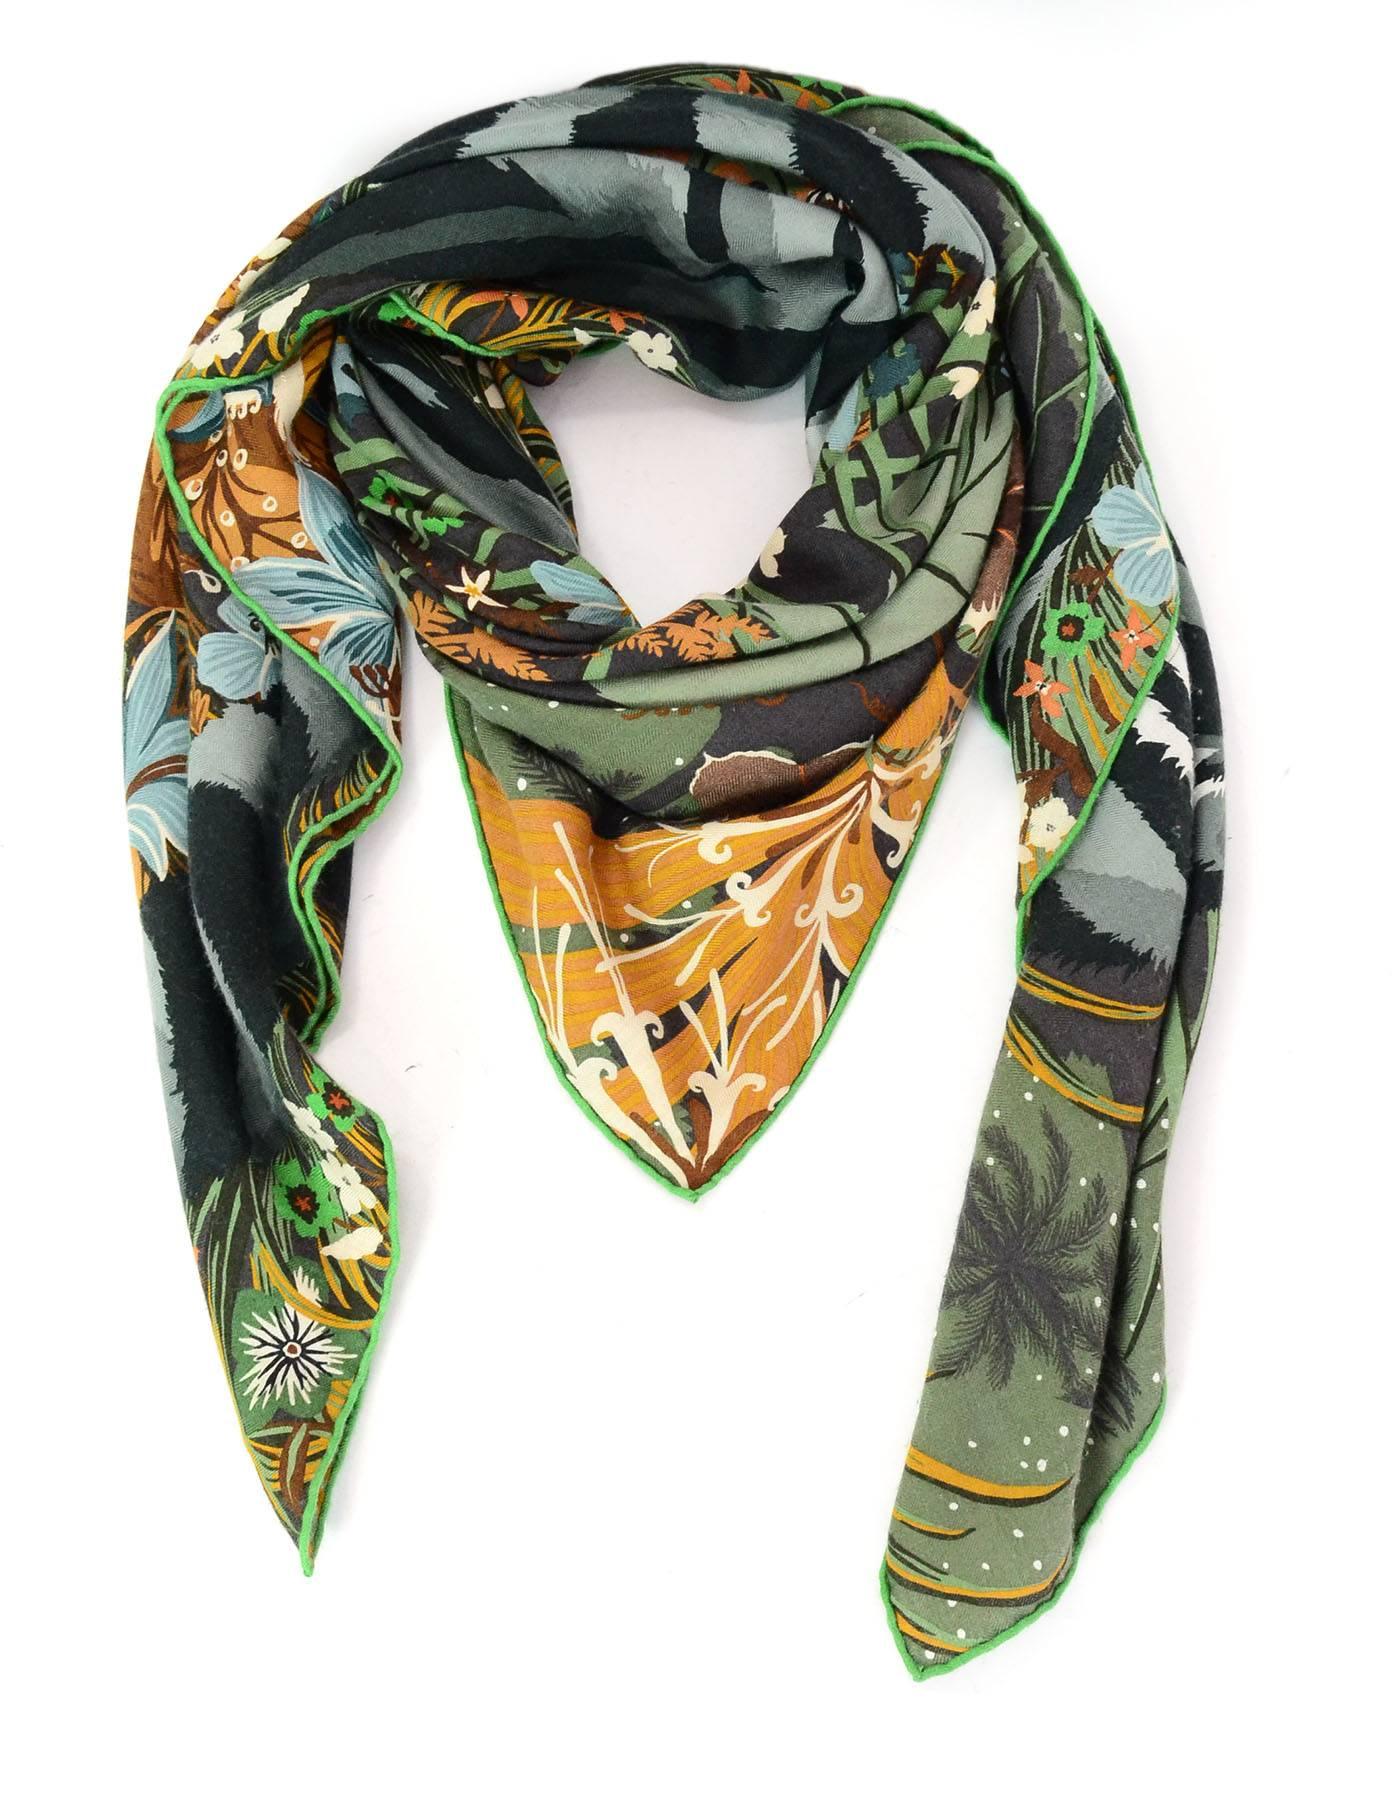 Hermes Green & Brown Tyger Tyger Cashmere & Silk 140cm Shawl
Design is in tribute to William Blake's poem The Tyger

Made In: France
Color: Brown, green
Composition: 70% cashmere, 30% silk
Retail Price: $1,100 + tax
Overall Condition: Very good